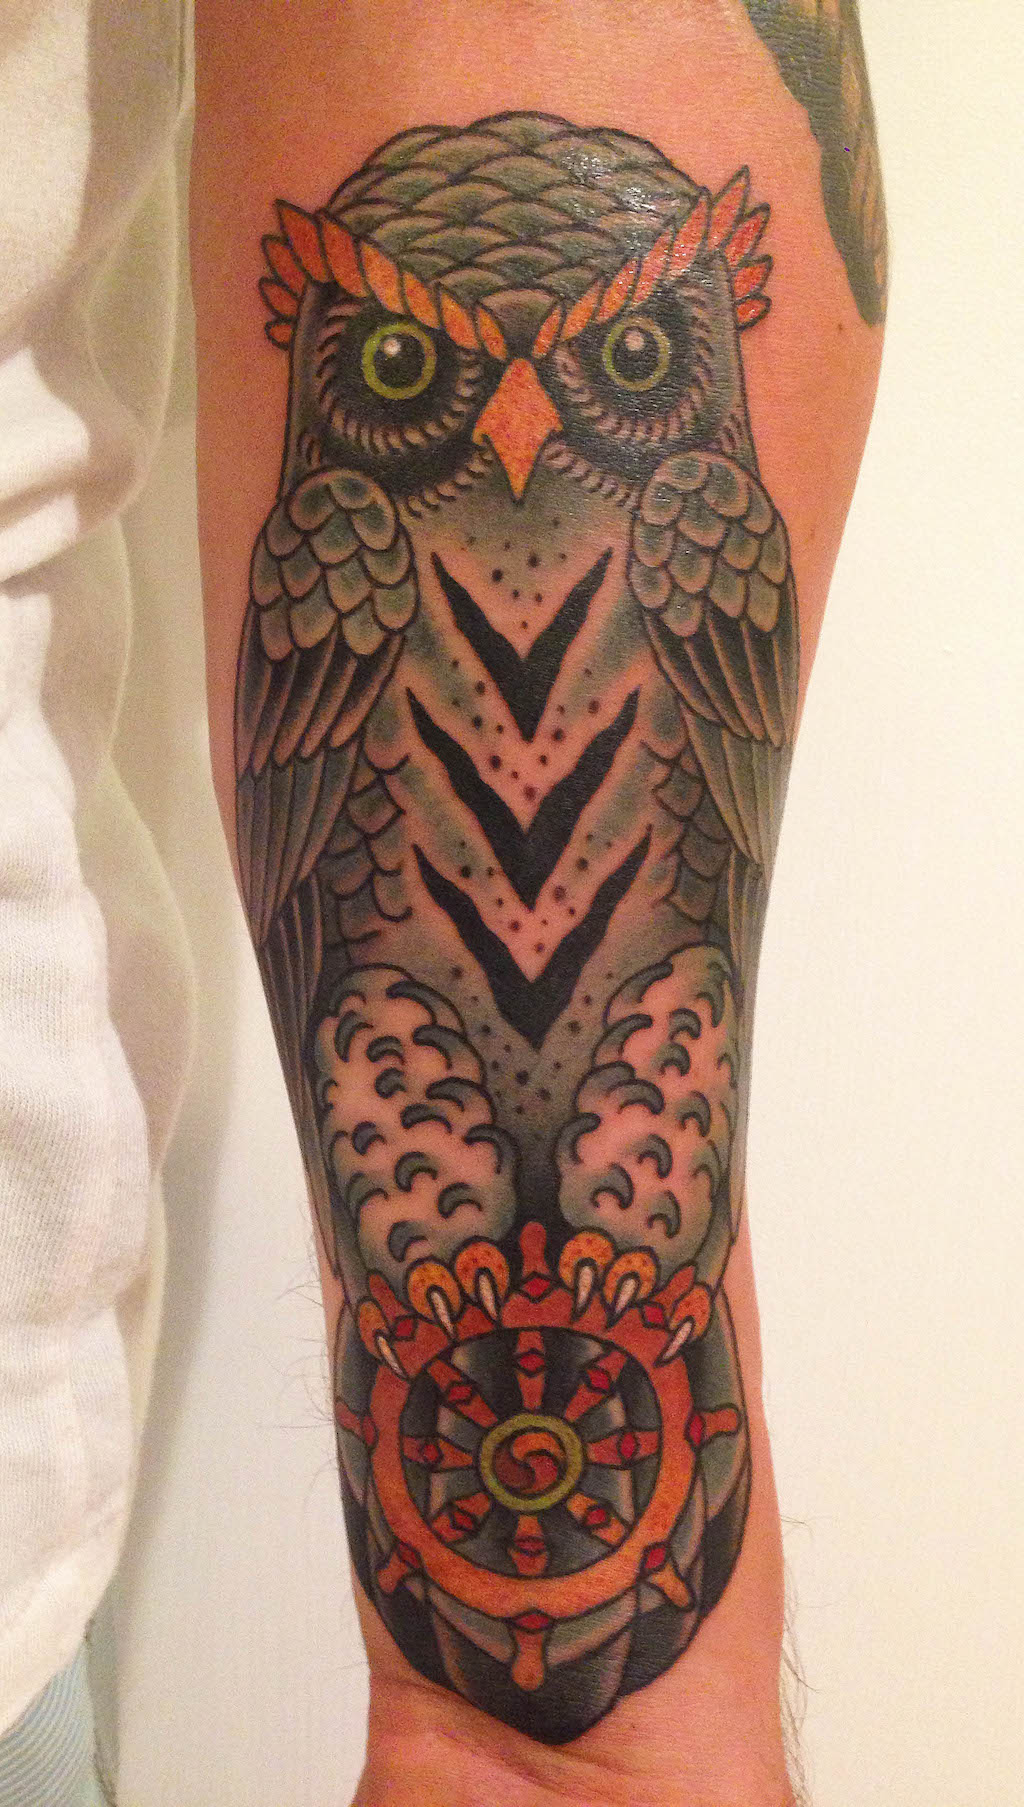 Tattoo-Inspiration-of-Owl-posted-by-Dave-Hartman